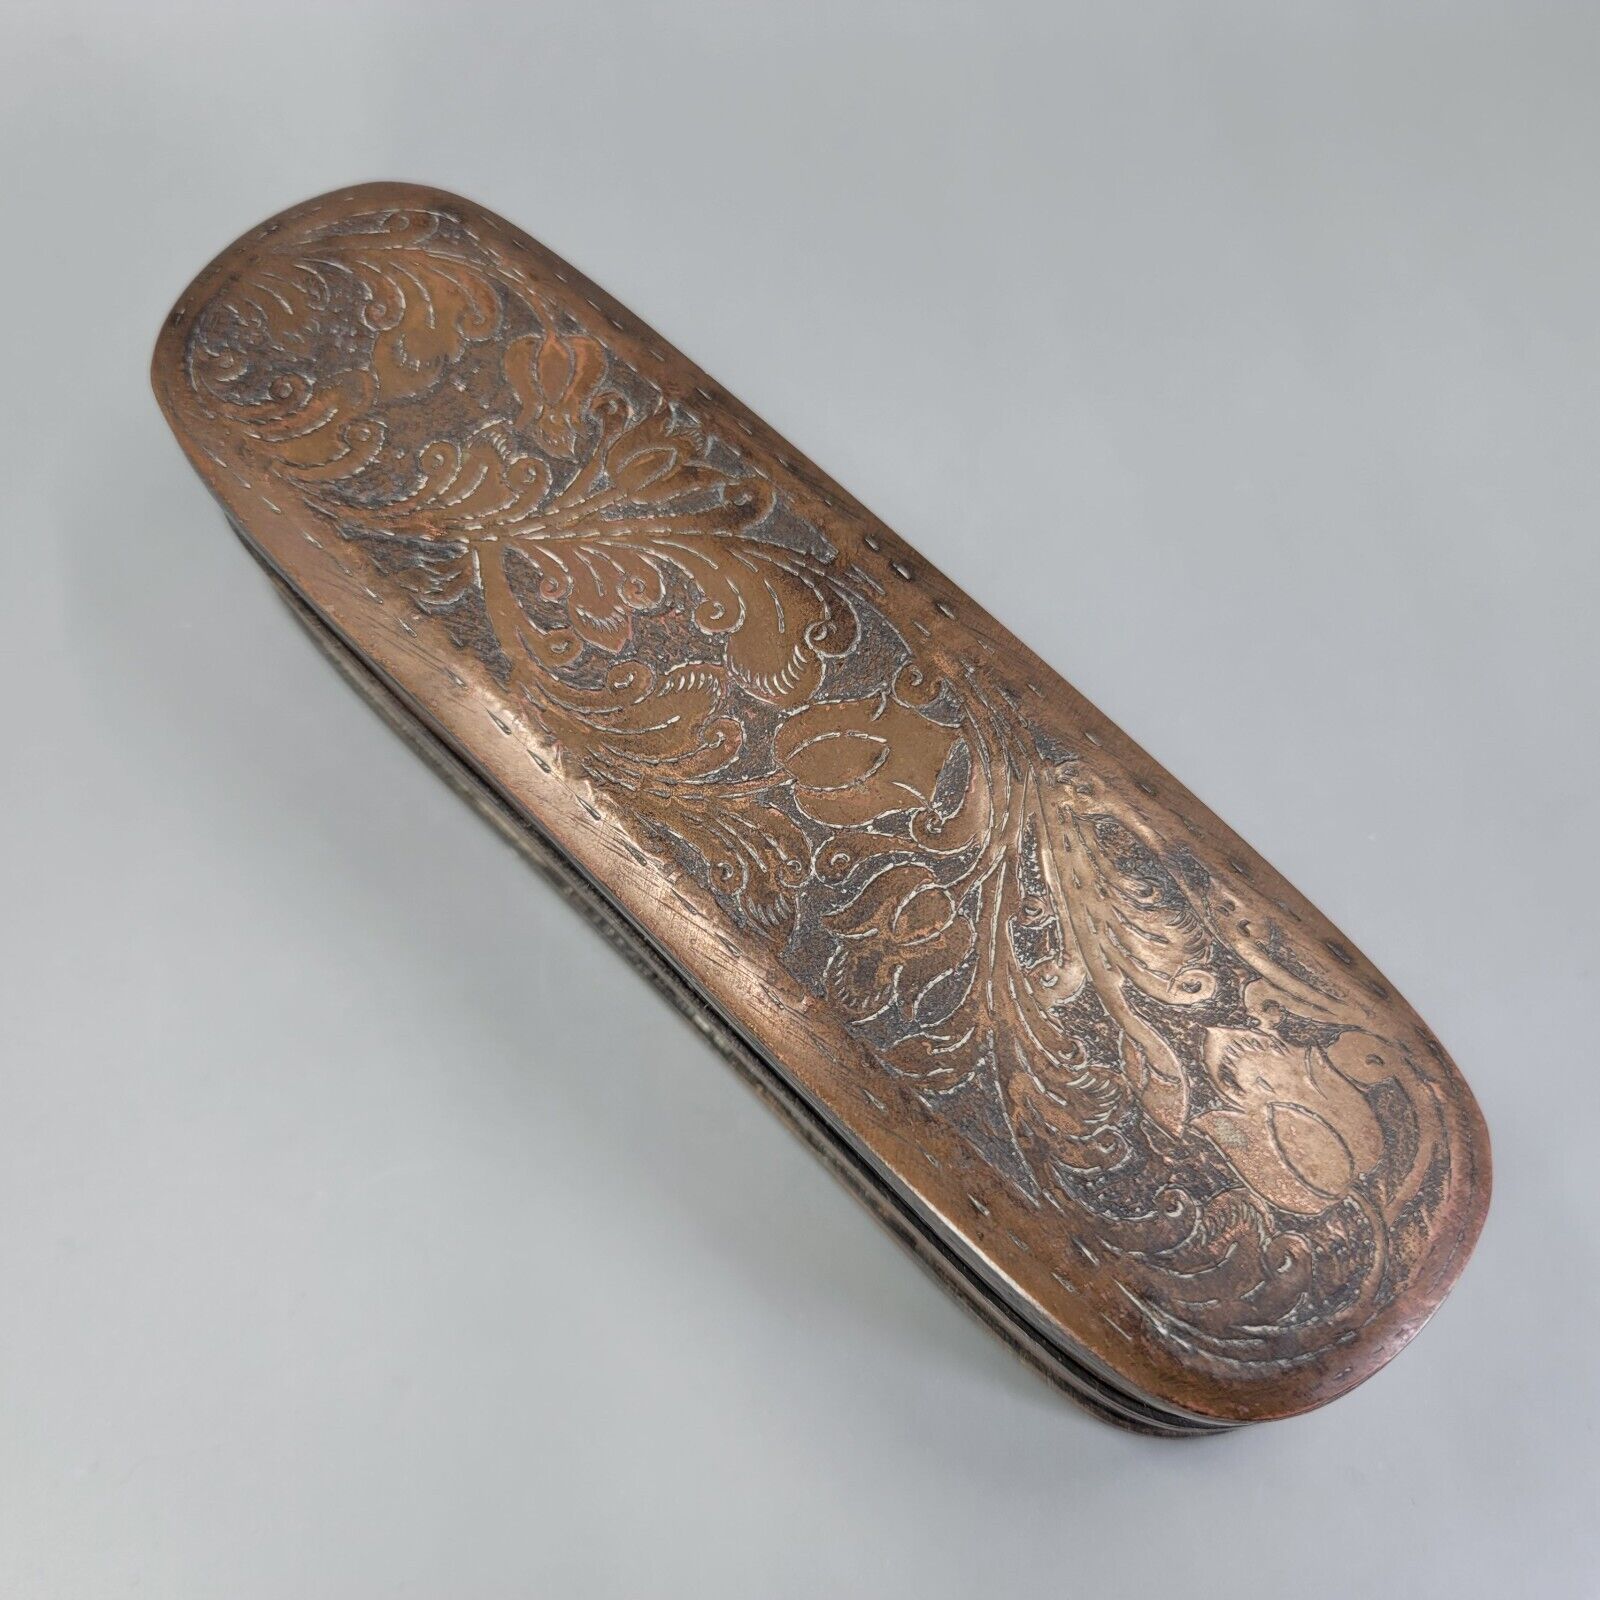 Early 18th Century Antique Copper Dutch Table Tobacco Box - Unique Hand Engraved